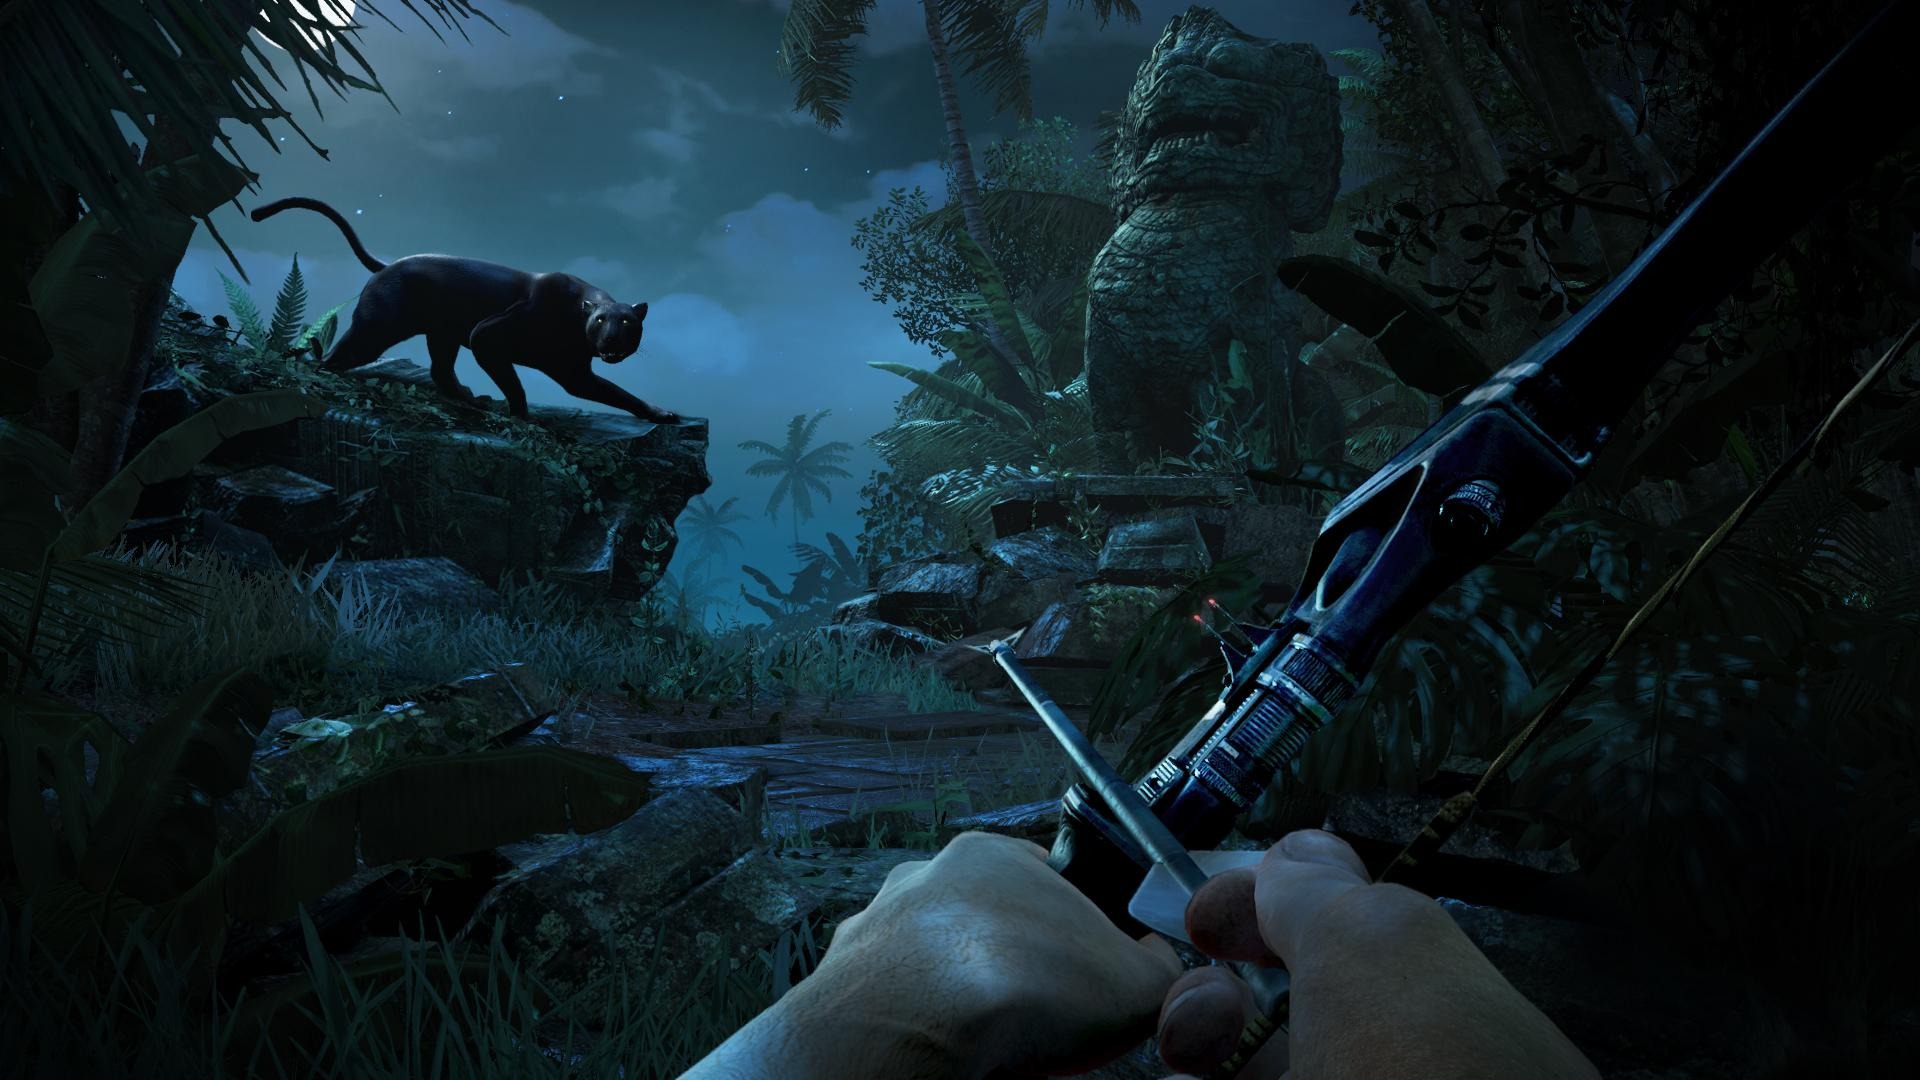 1080p far cry 3 images